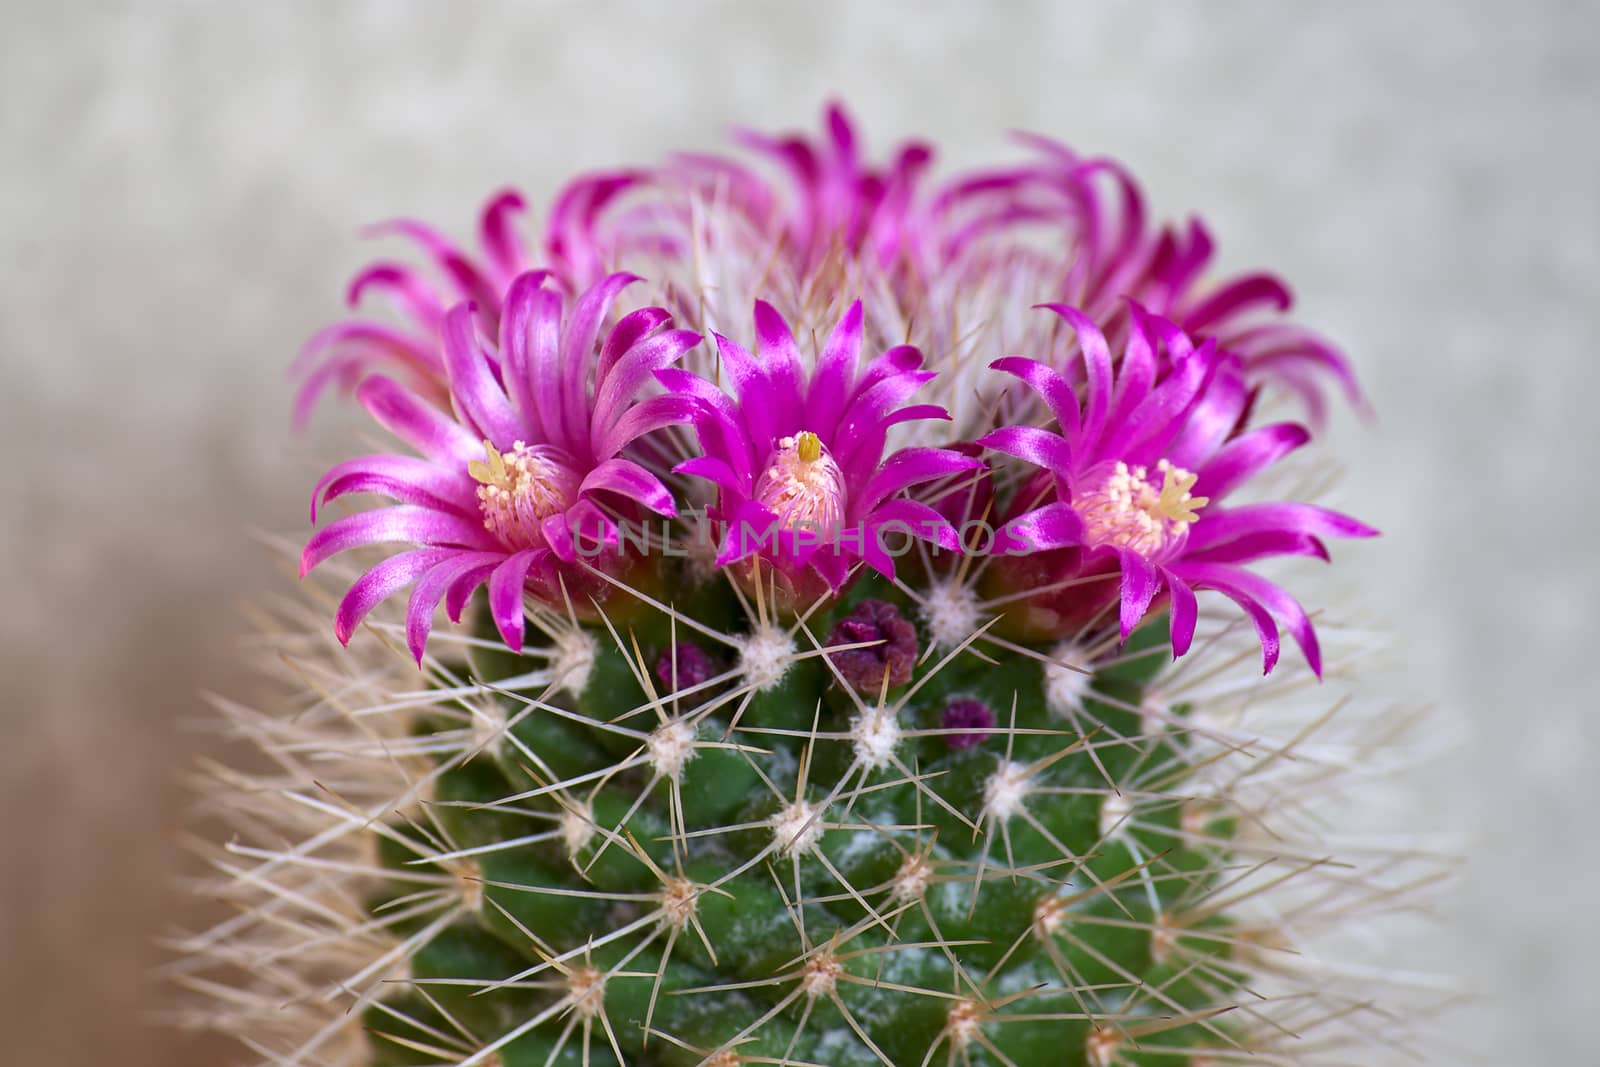 Cactus with flowers  on light background (Mammillaria).Image with shallow depth of field.